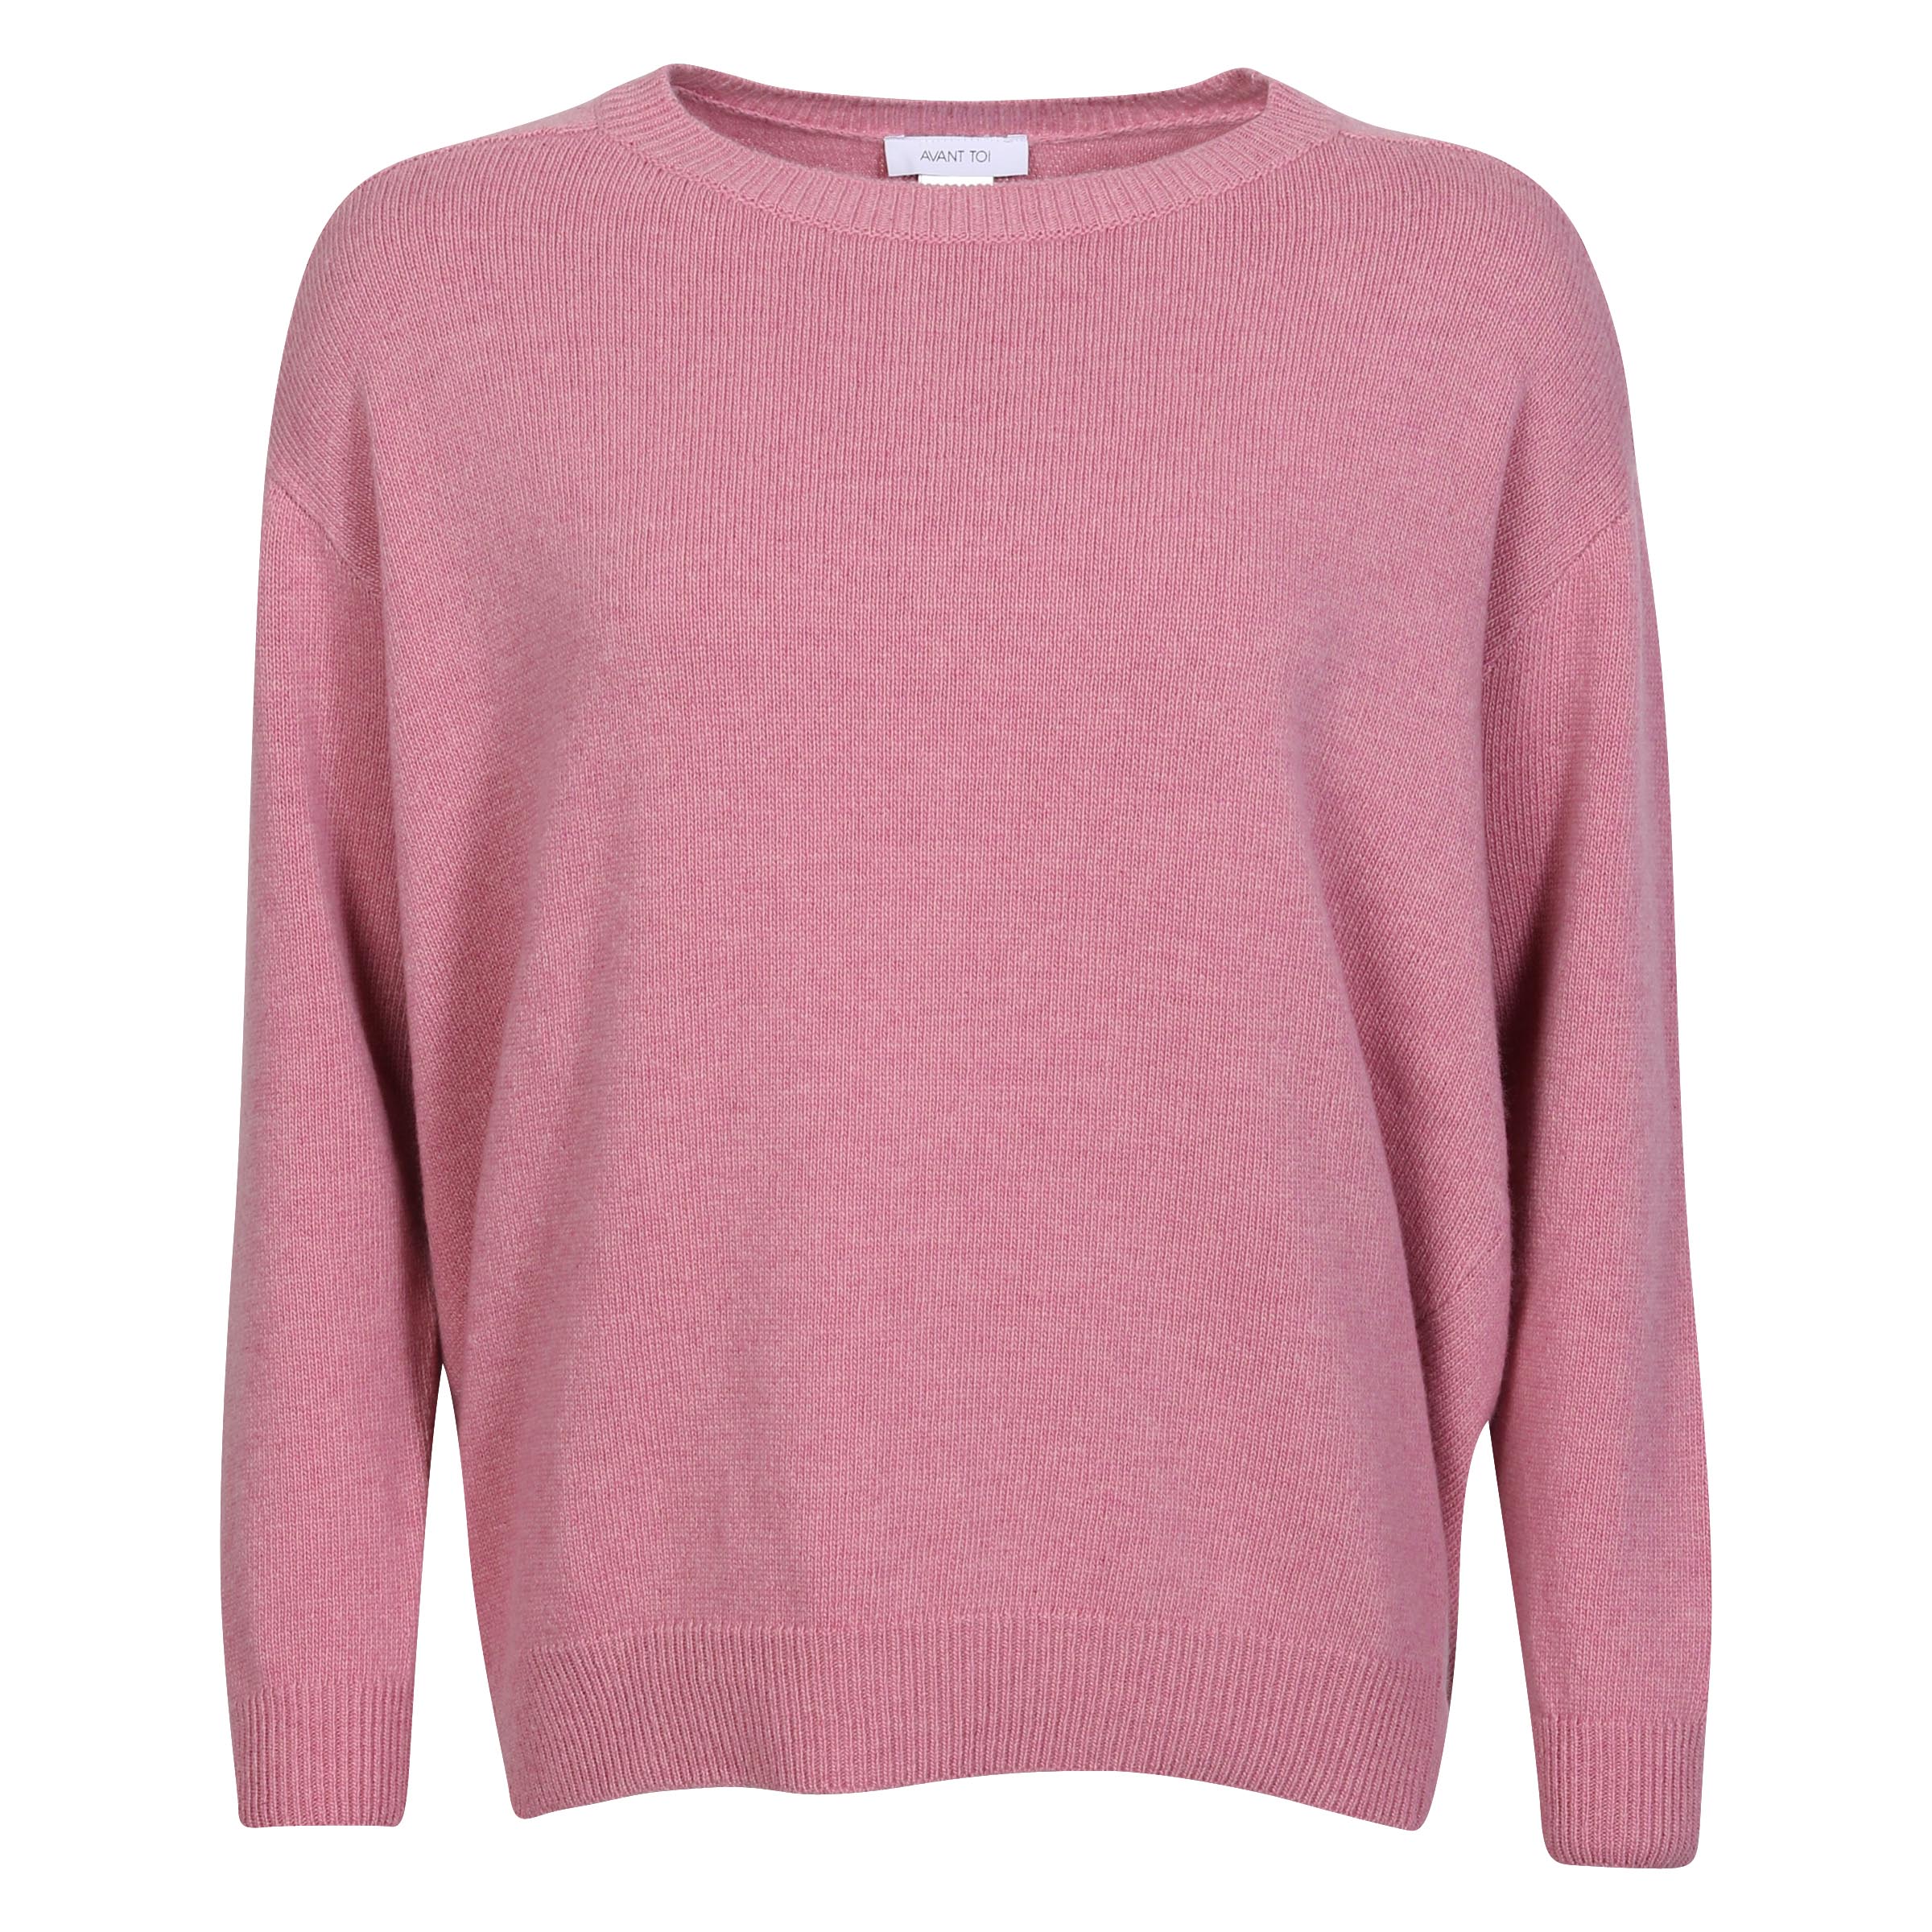 Avant Toi Knit Sweater in Pink